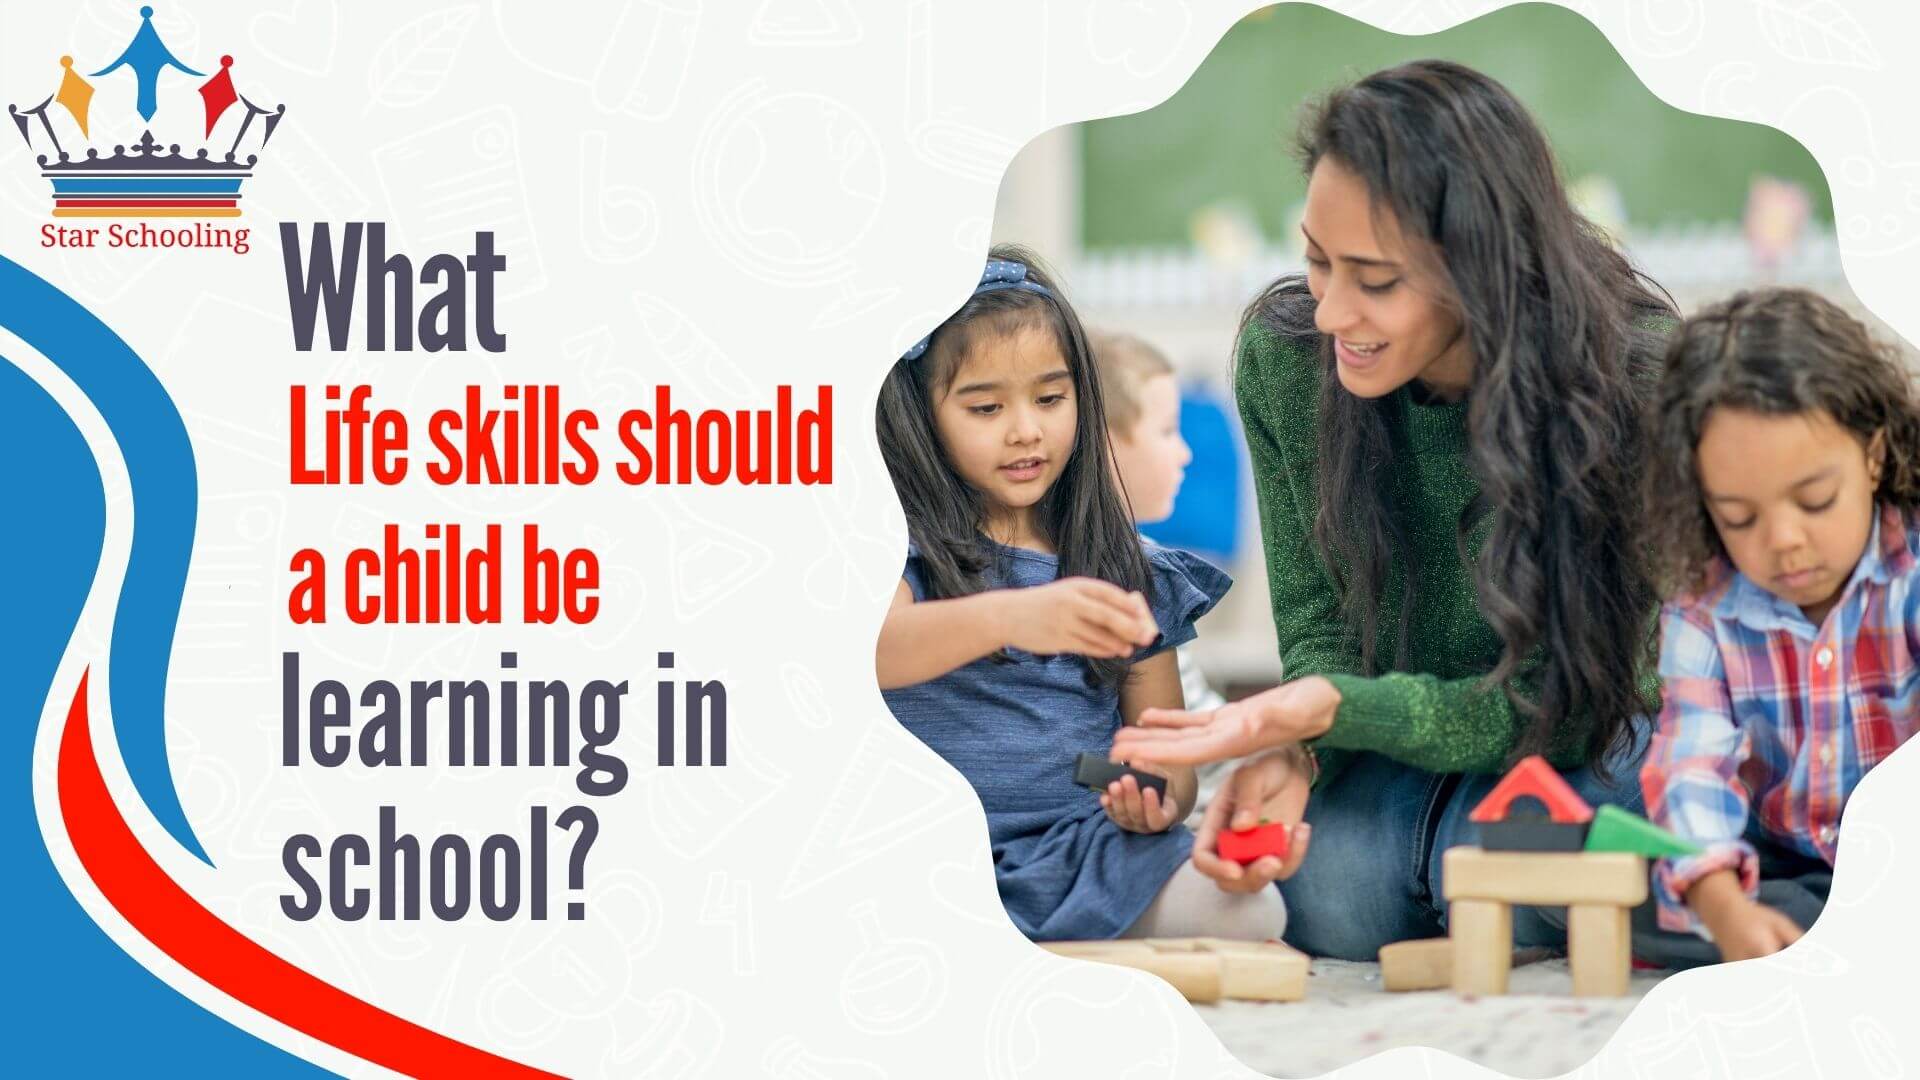 What Life skills should a child be learning in school?